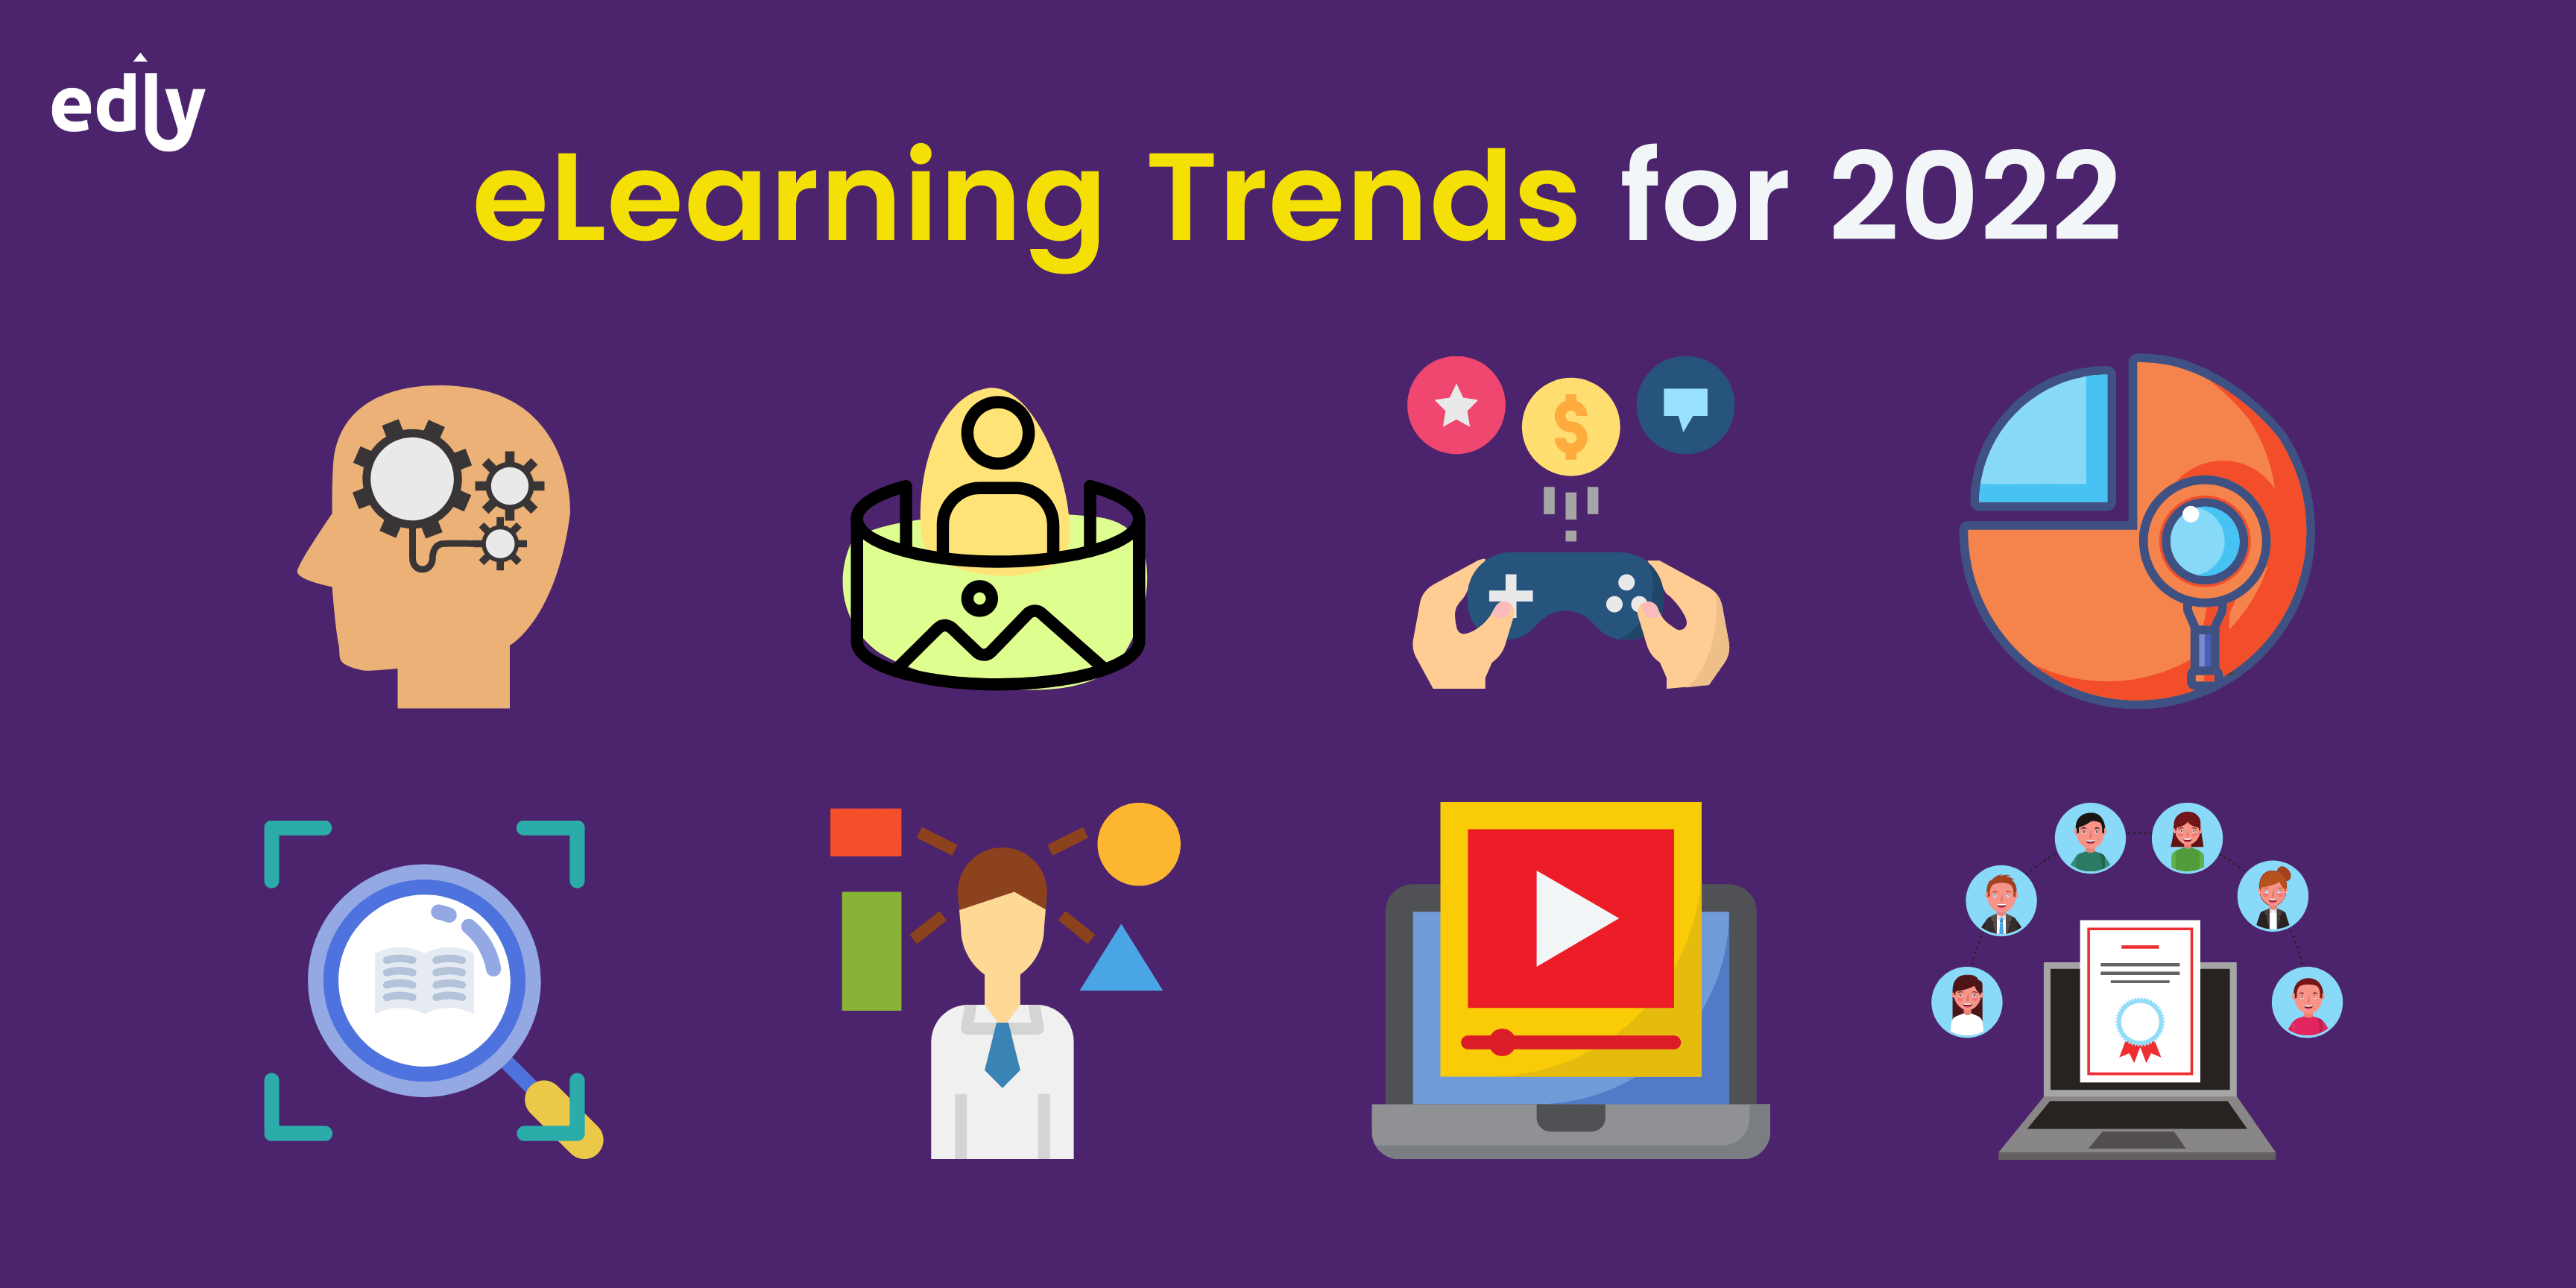 eLearning Trends Infographic